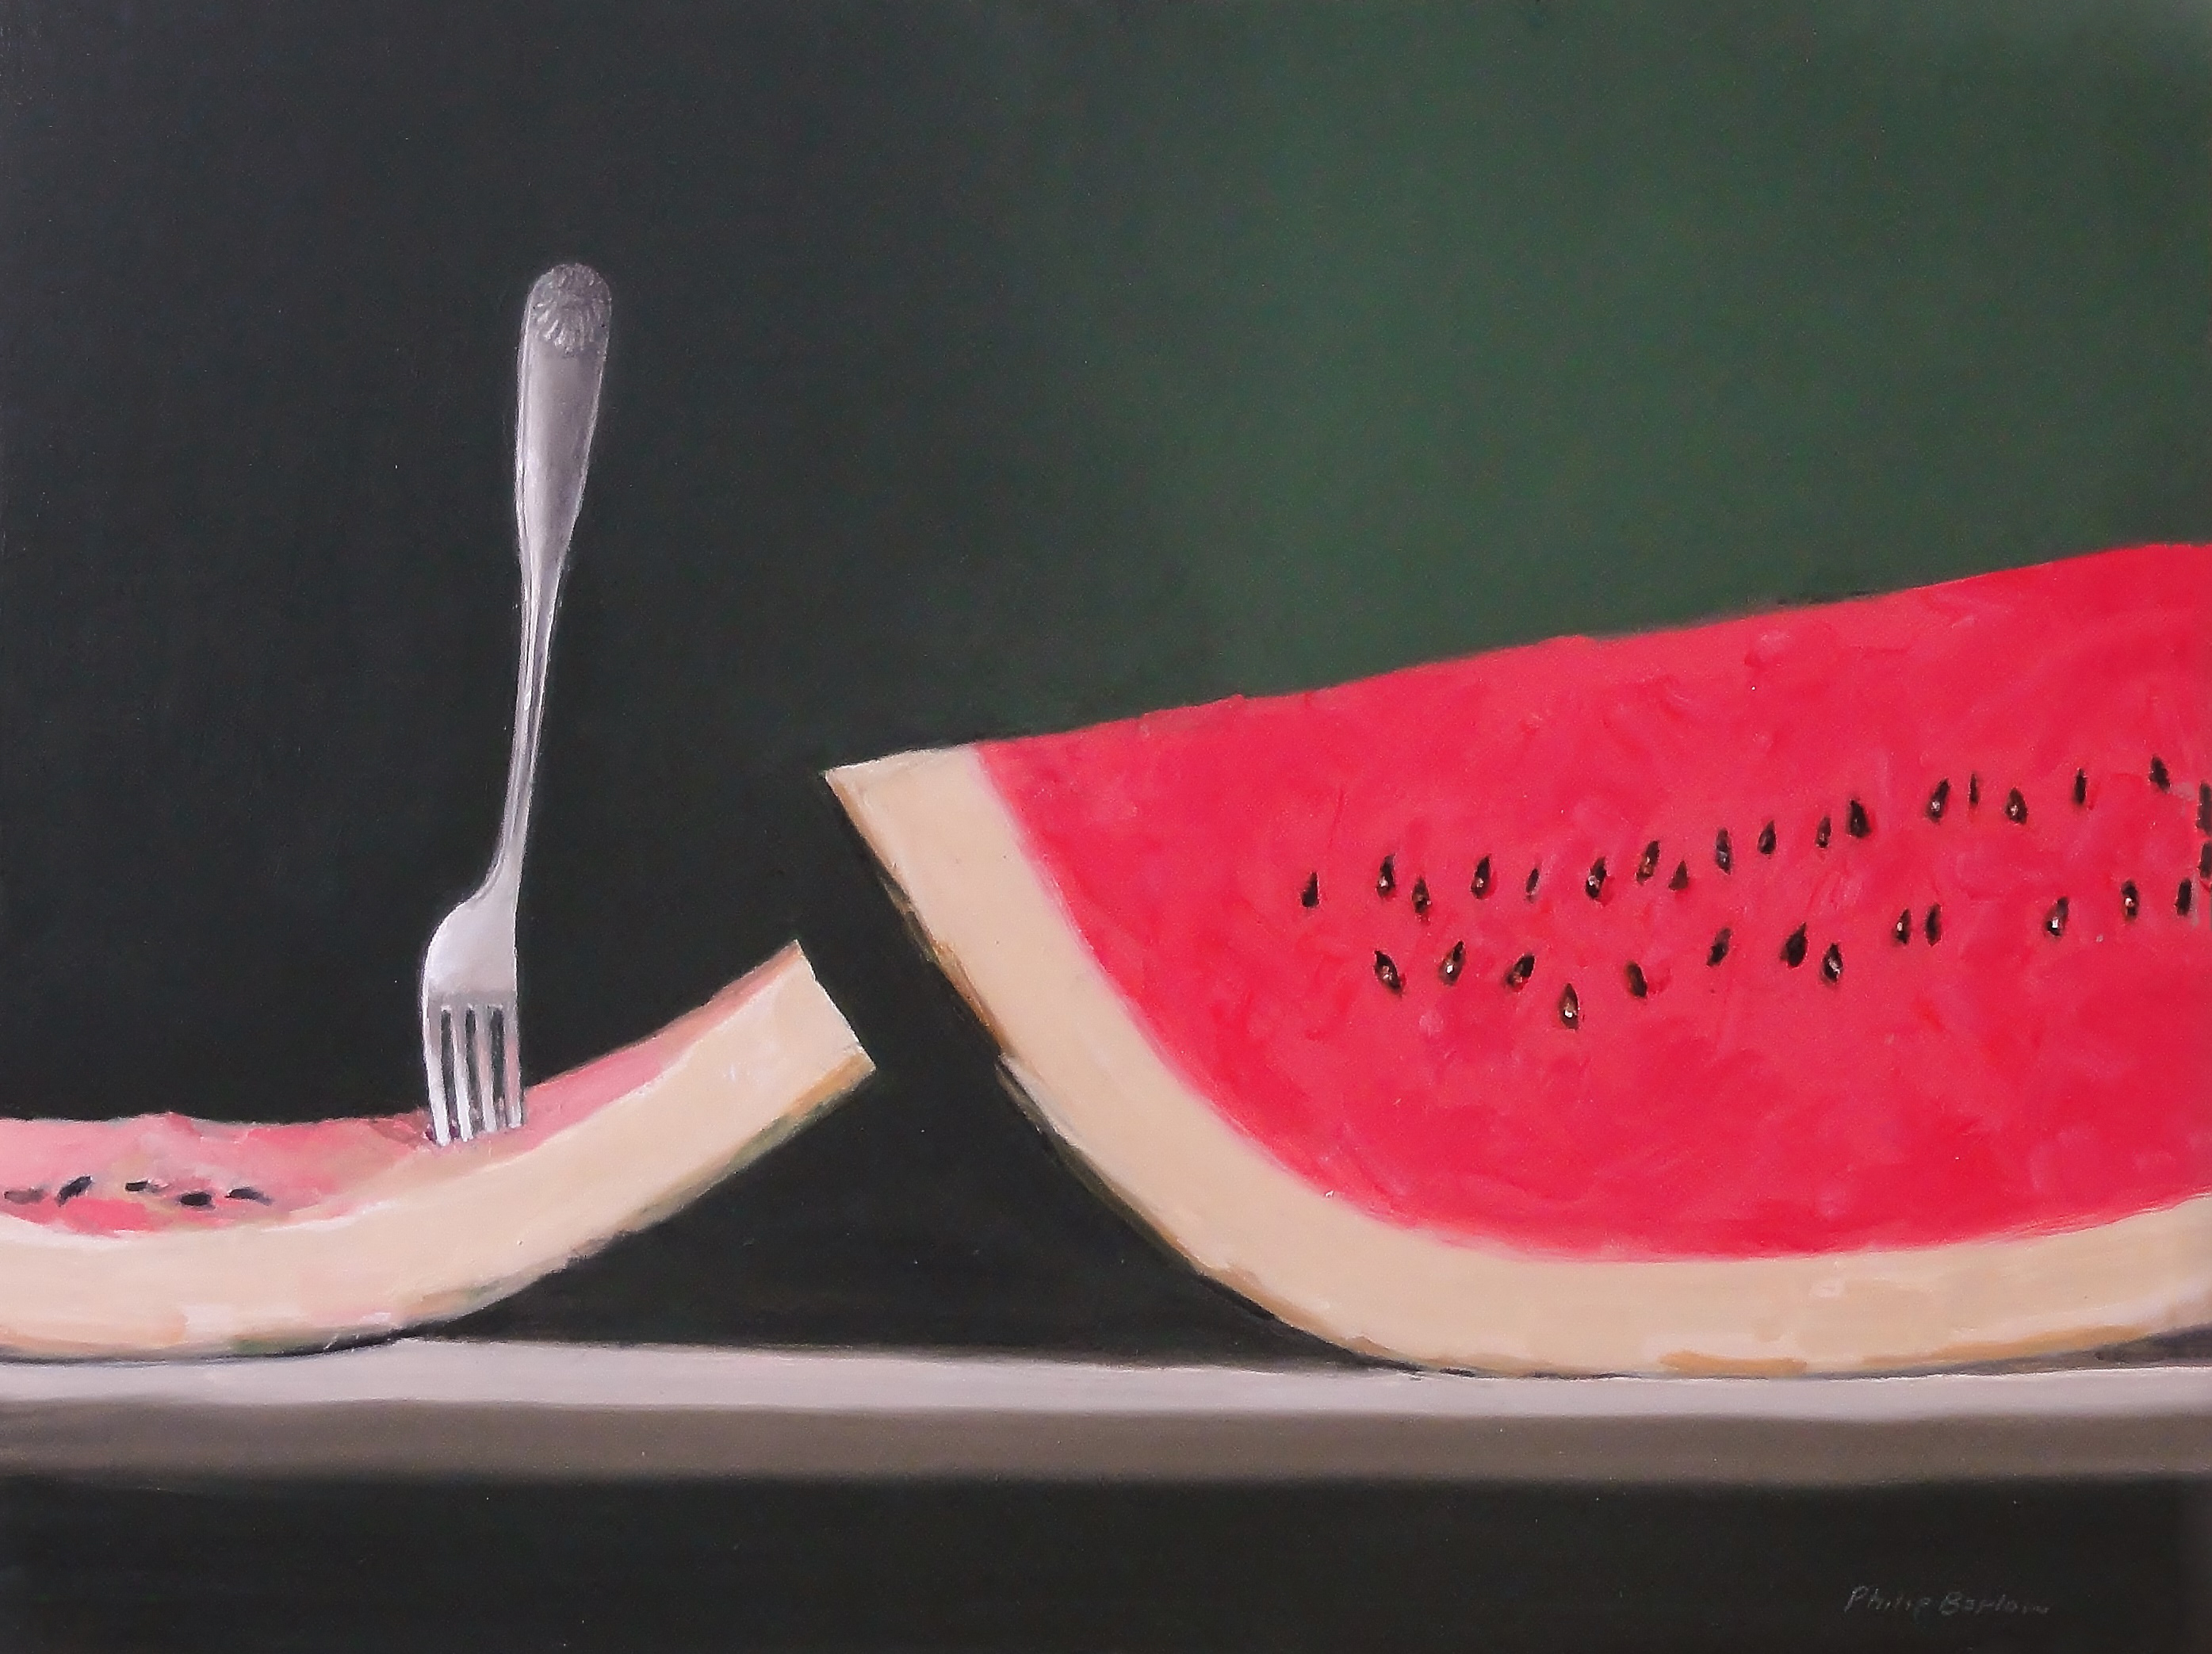 Melon with Class, Philip Barlow